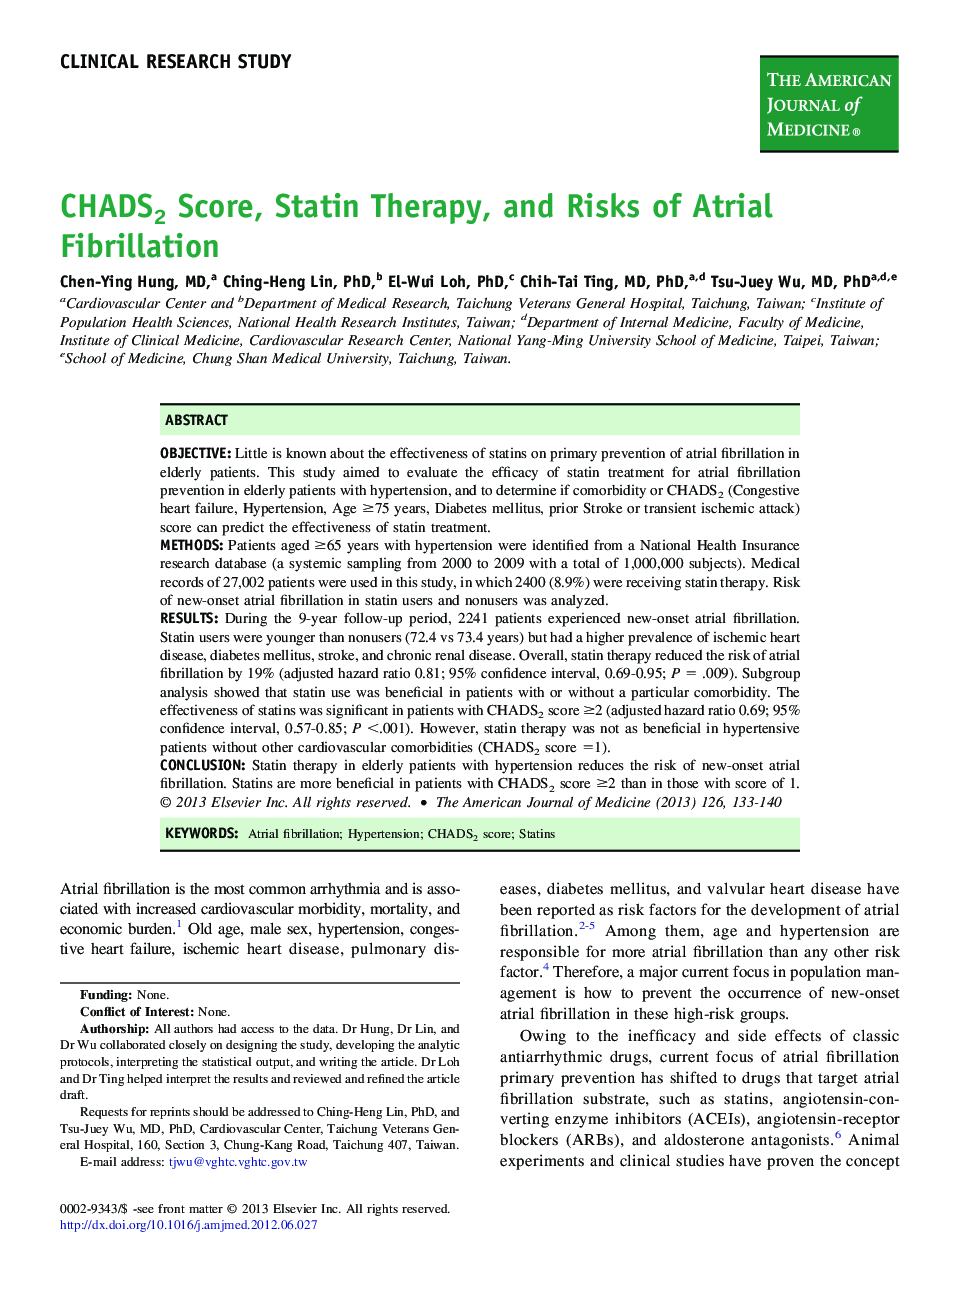 CHADS2 Score, Statin Therapy, and Risks of Atrial Fibrillation